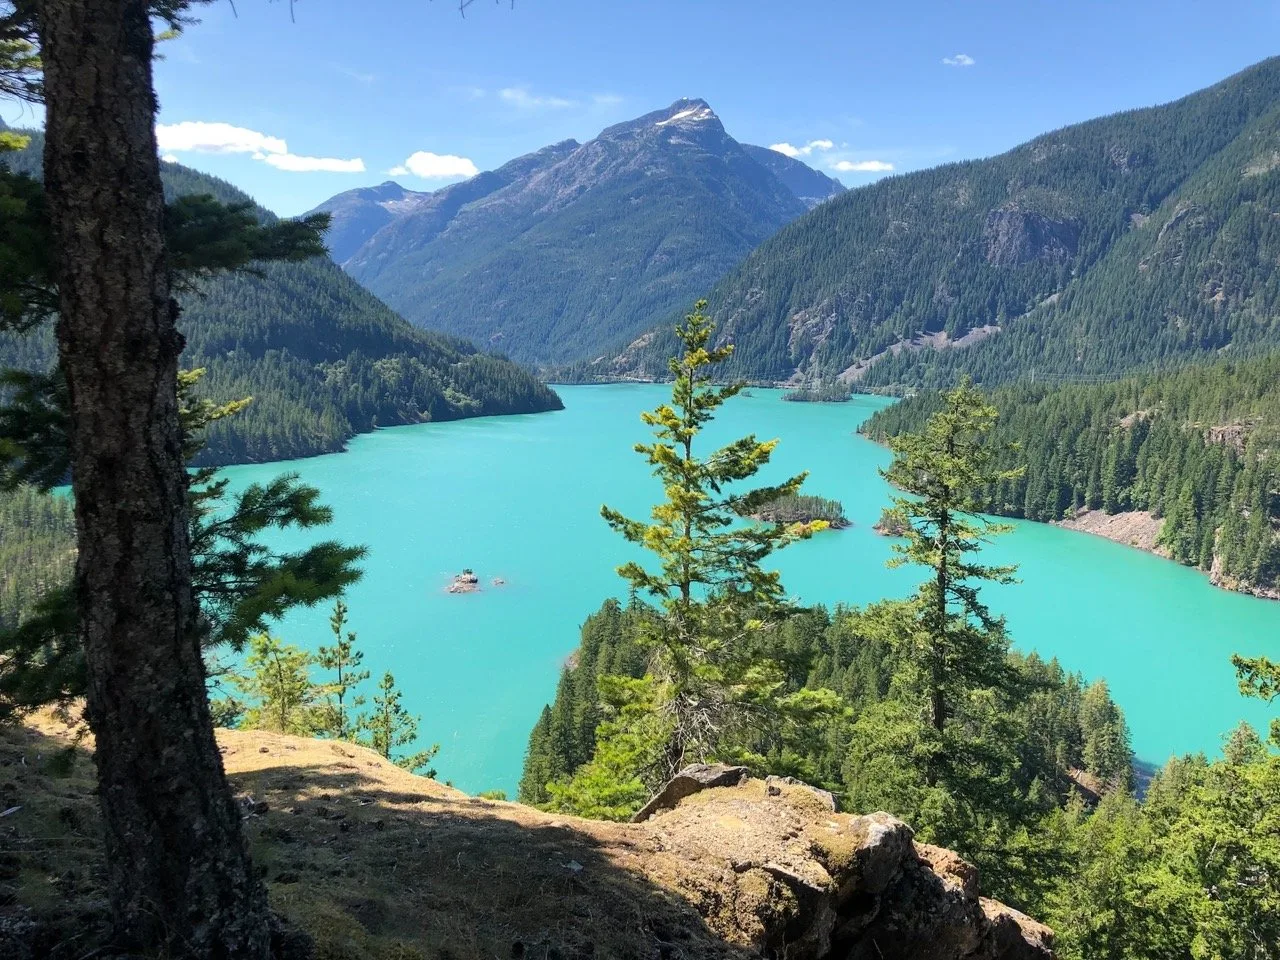 Diablo Lake viewpoint in North Cascades National Park - stop here on your Washington road trips